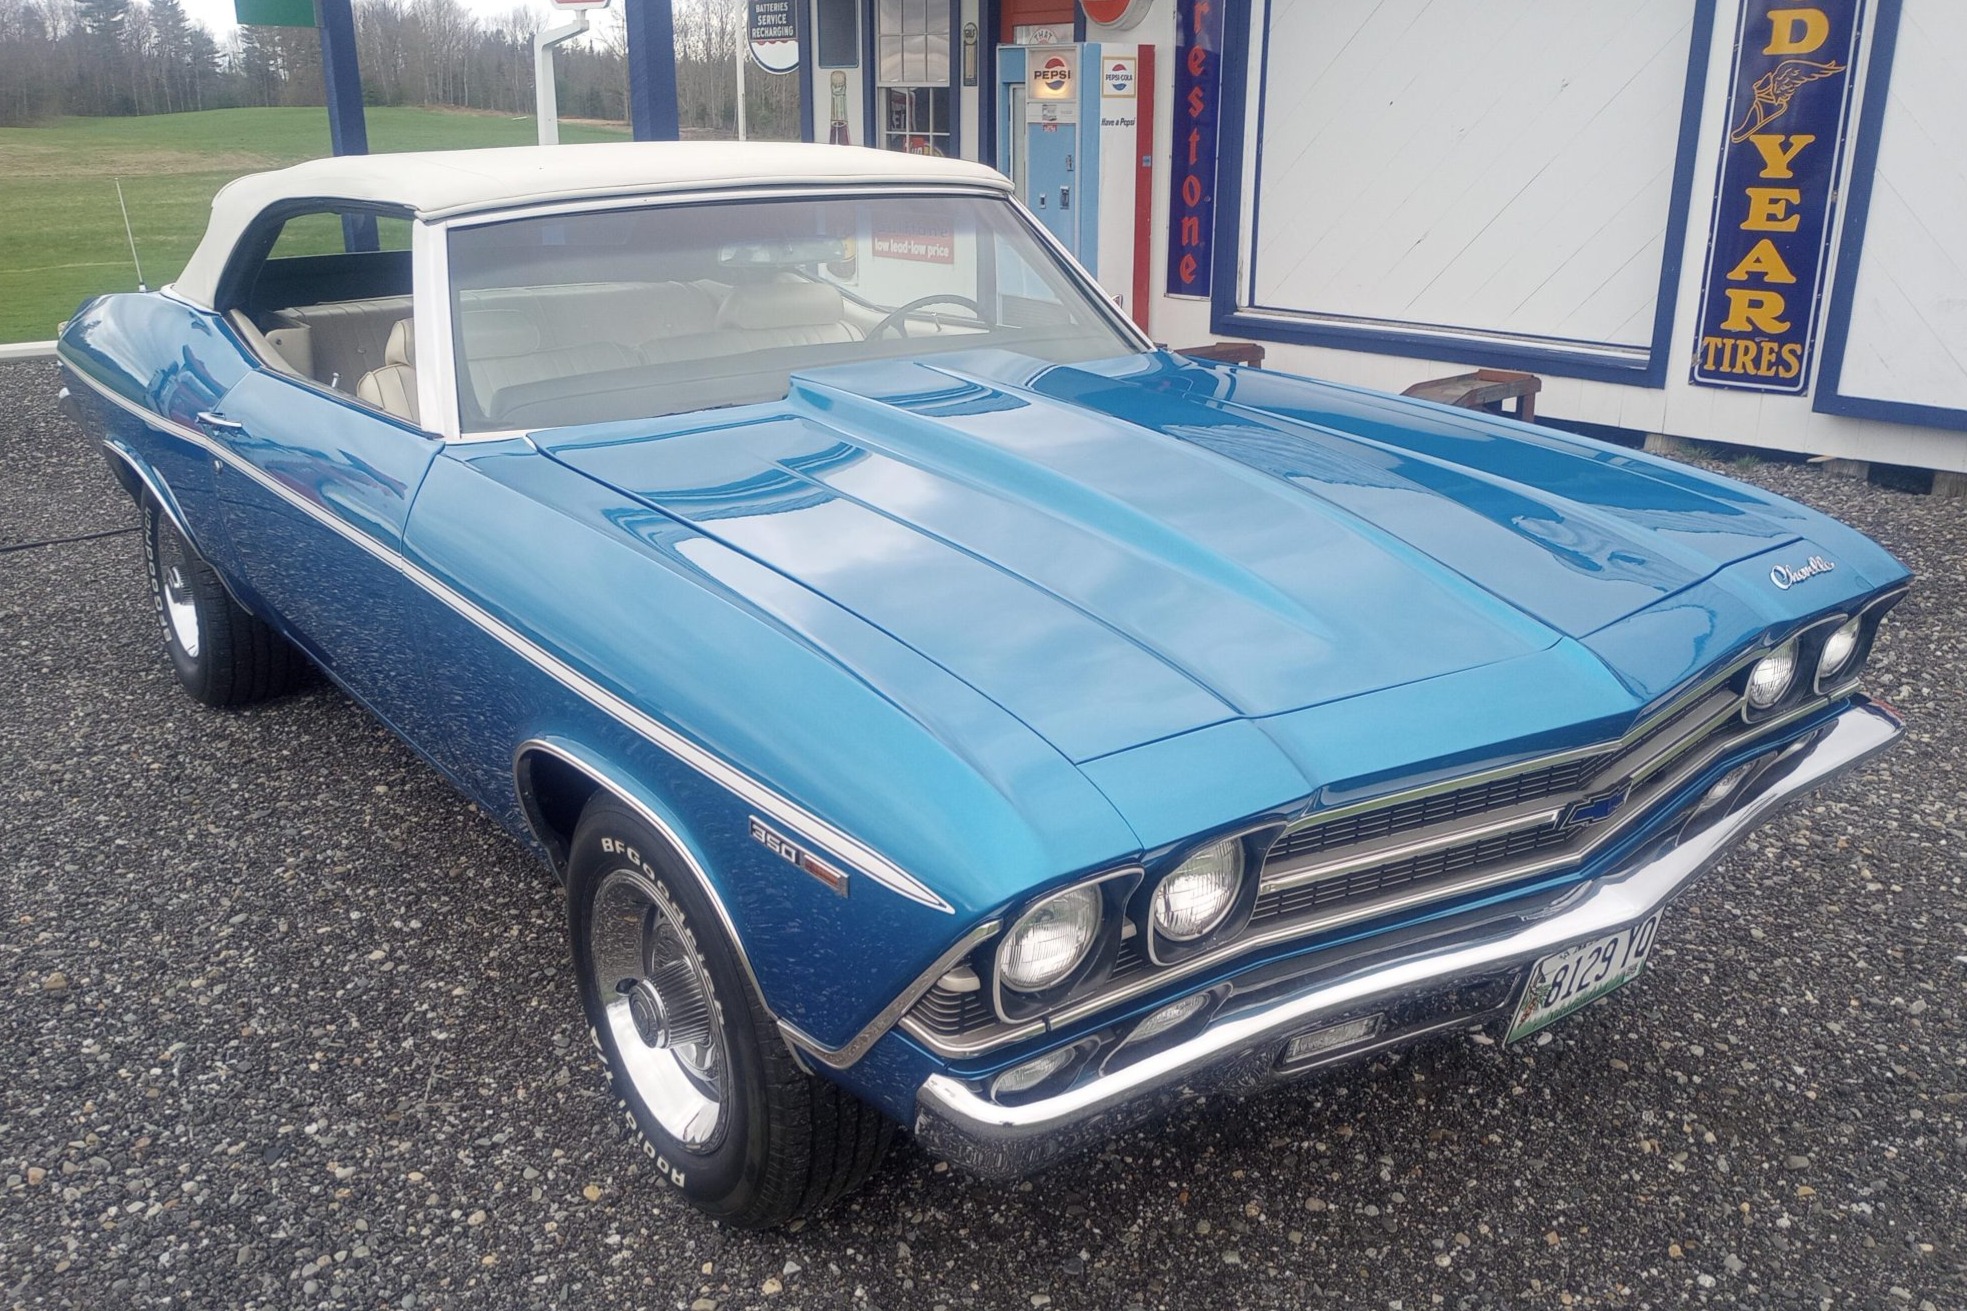 Used 5.7L-Powered 1969 Chevrolet Chevelle Malibu Convertible Review